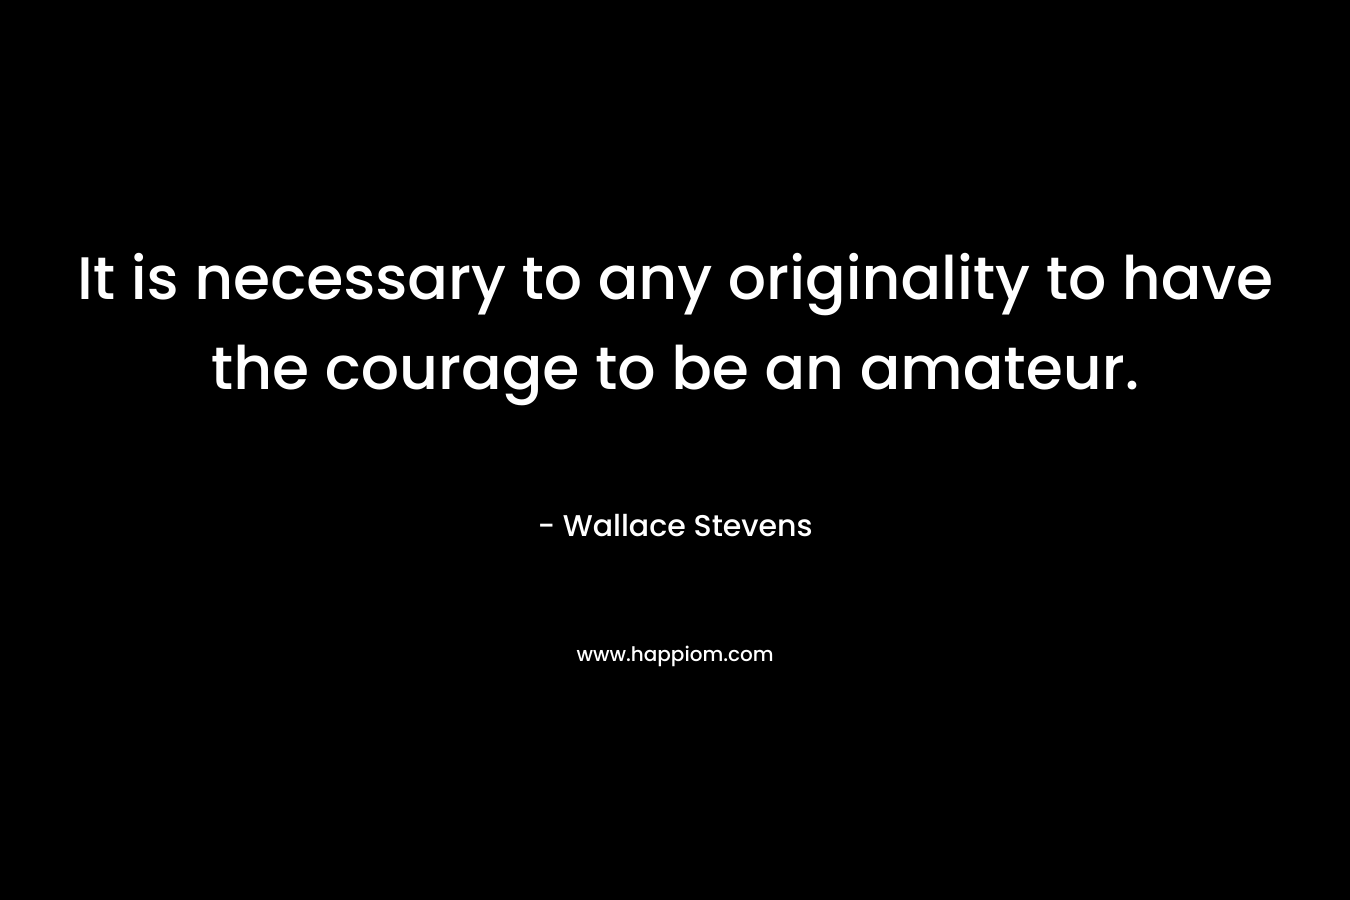 It is necessary to any originality to have the courage to be an amateur. – Wallace Stevens